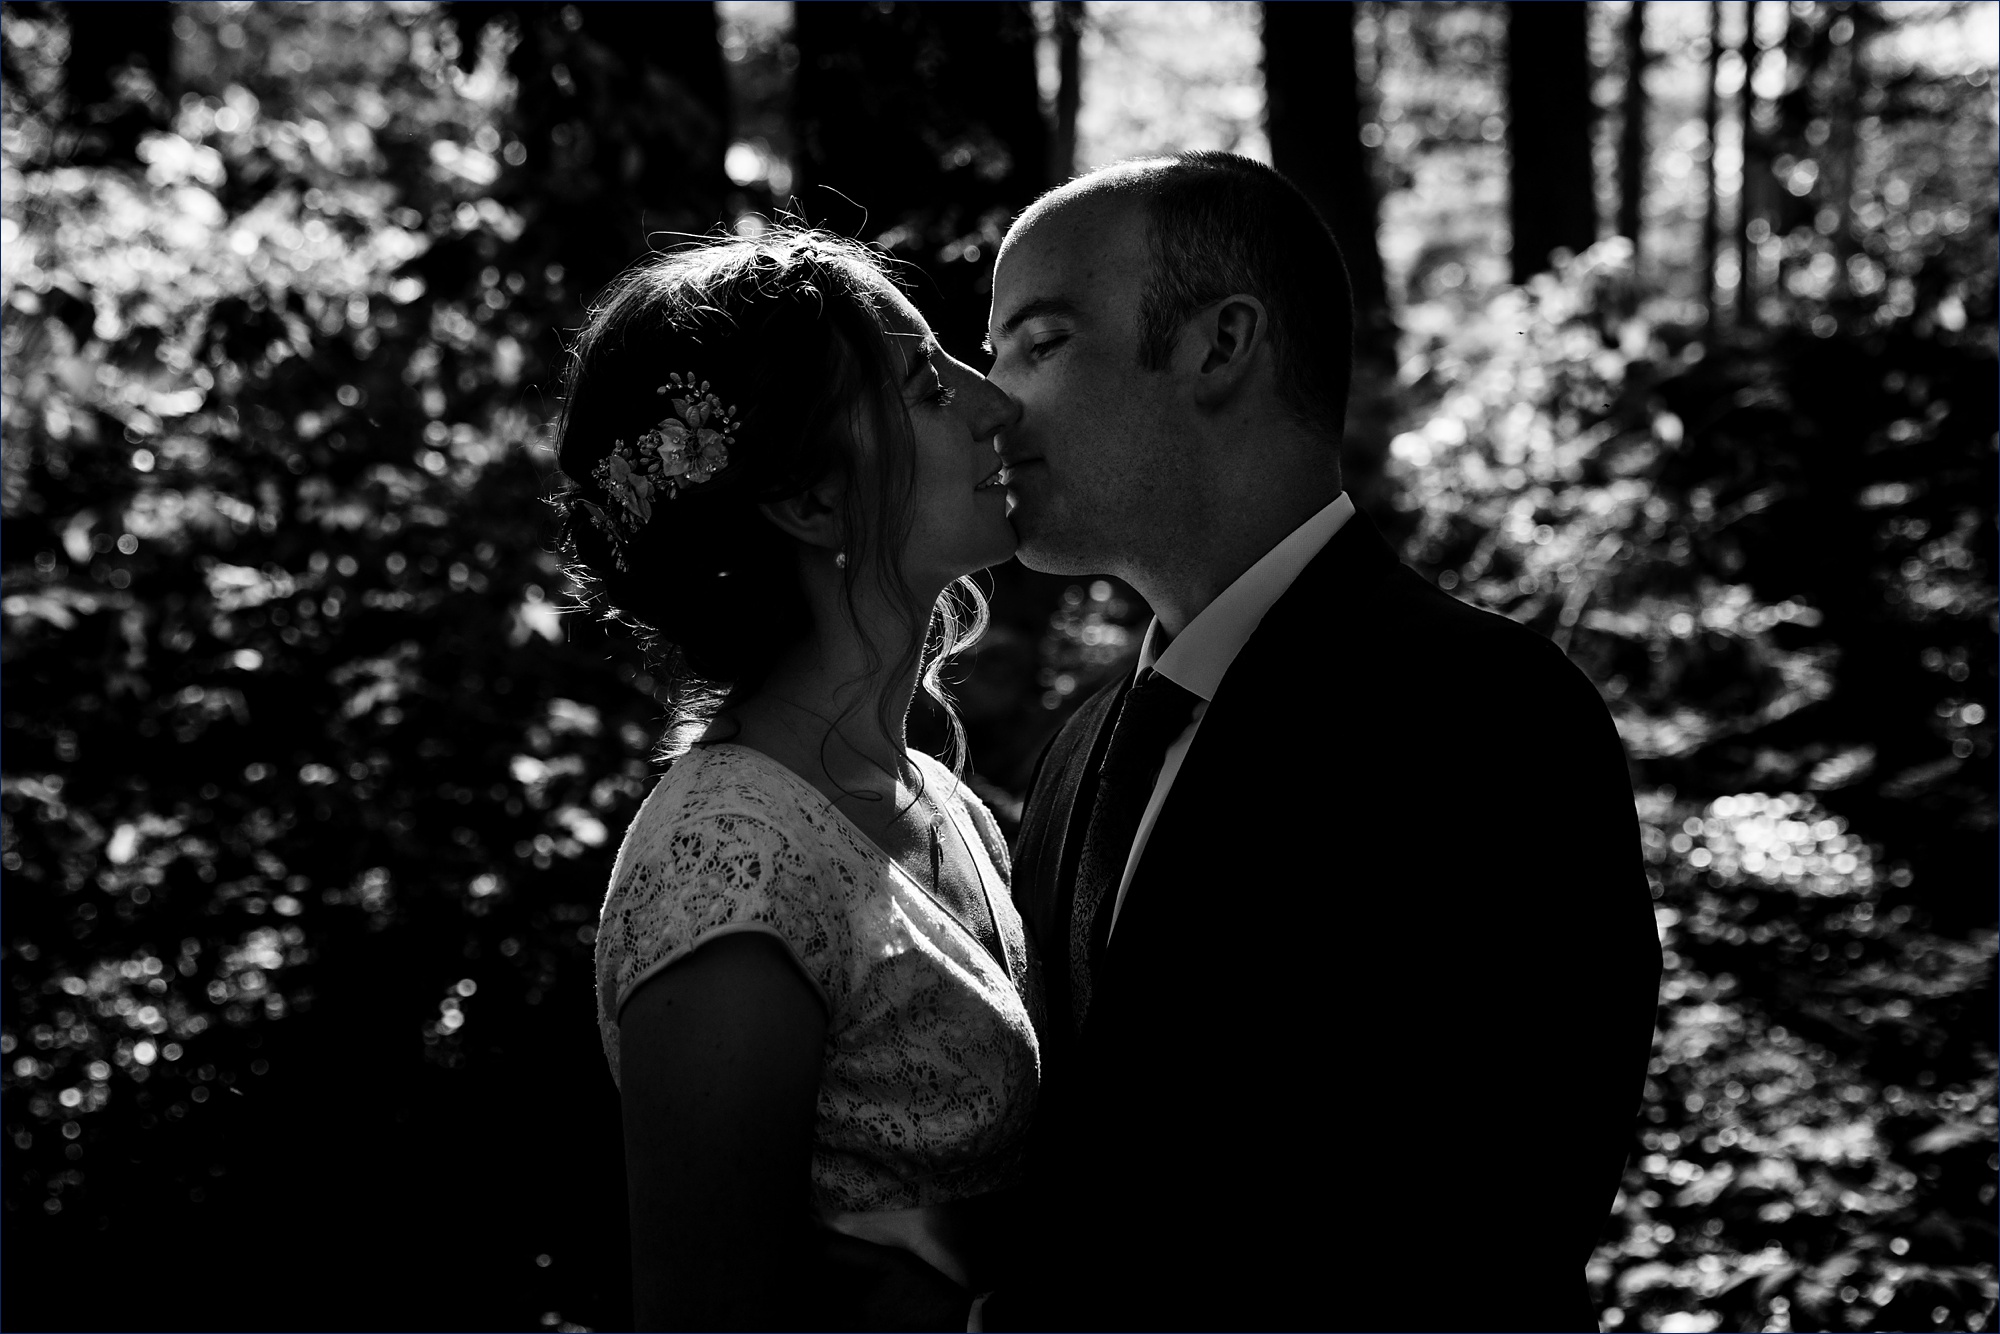 The bride and groom kiss one another in the woods of New Hampshire after their ceremony